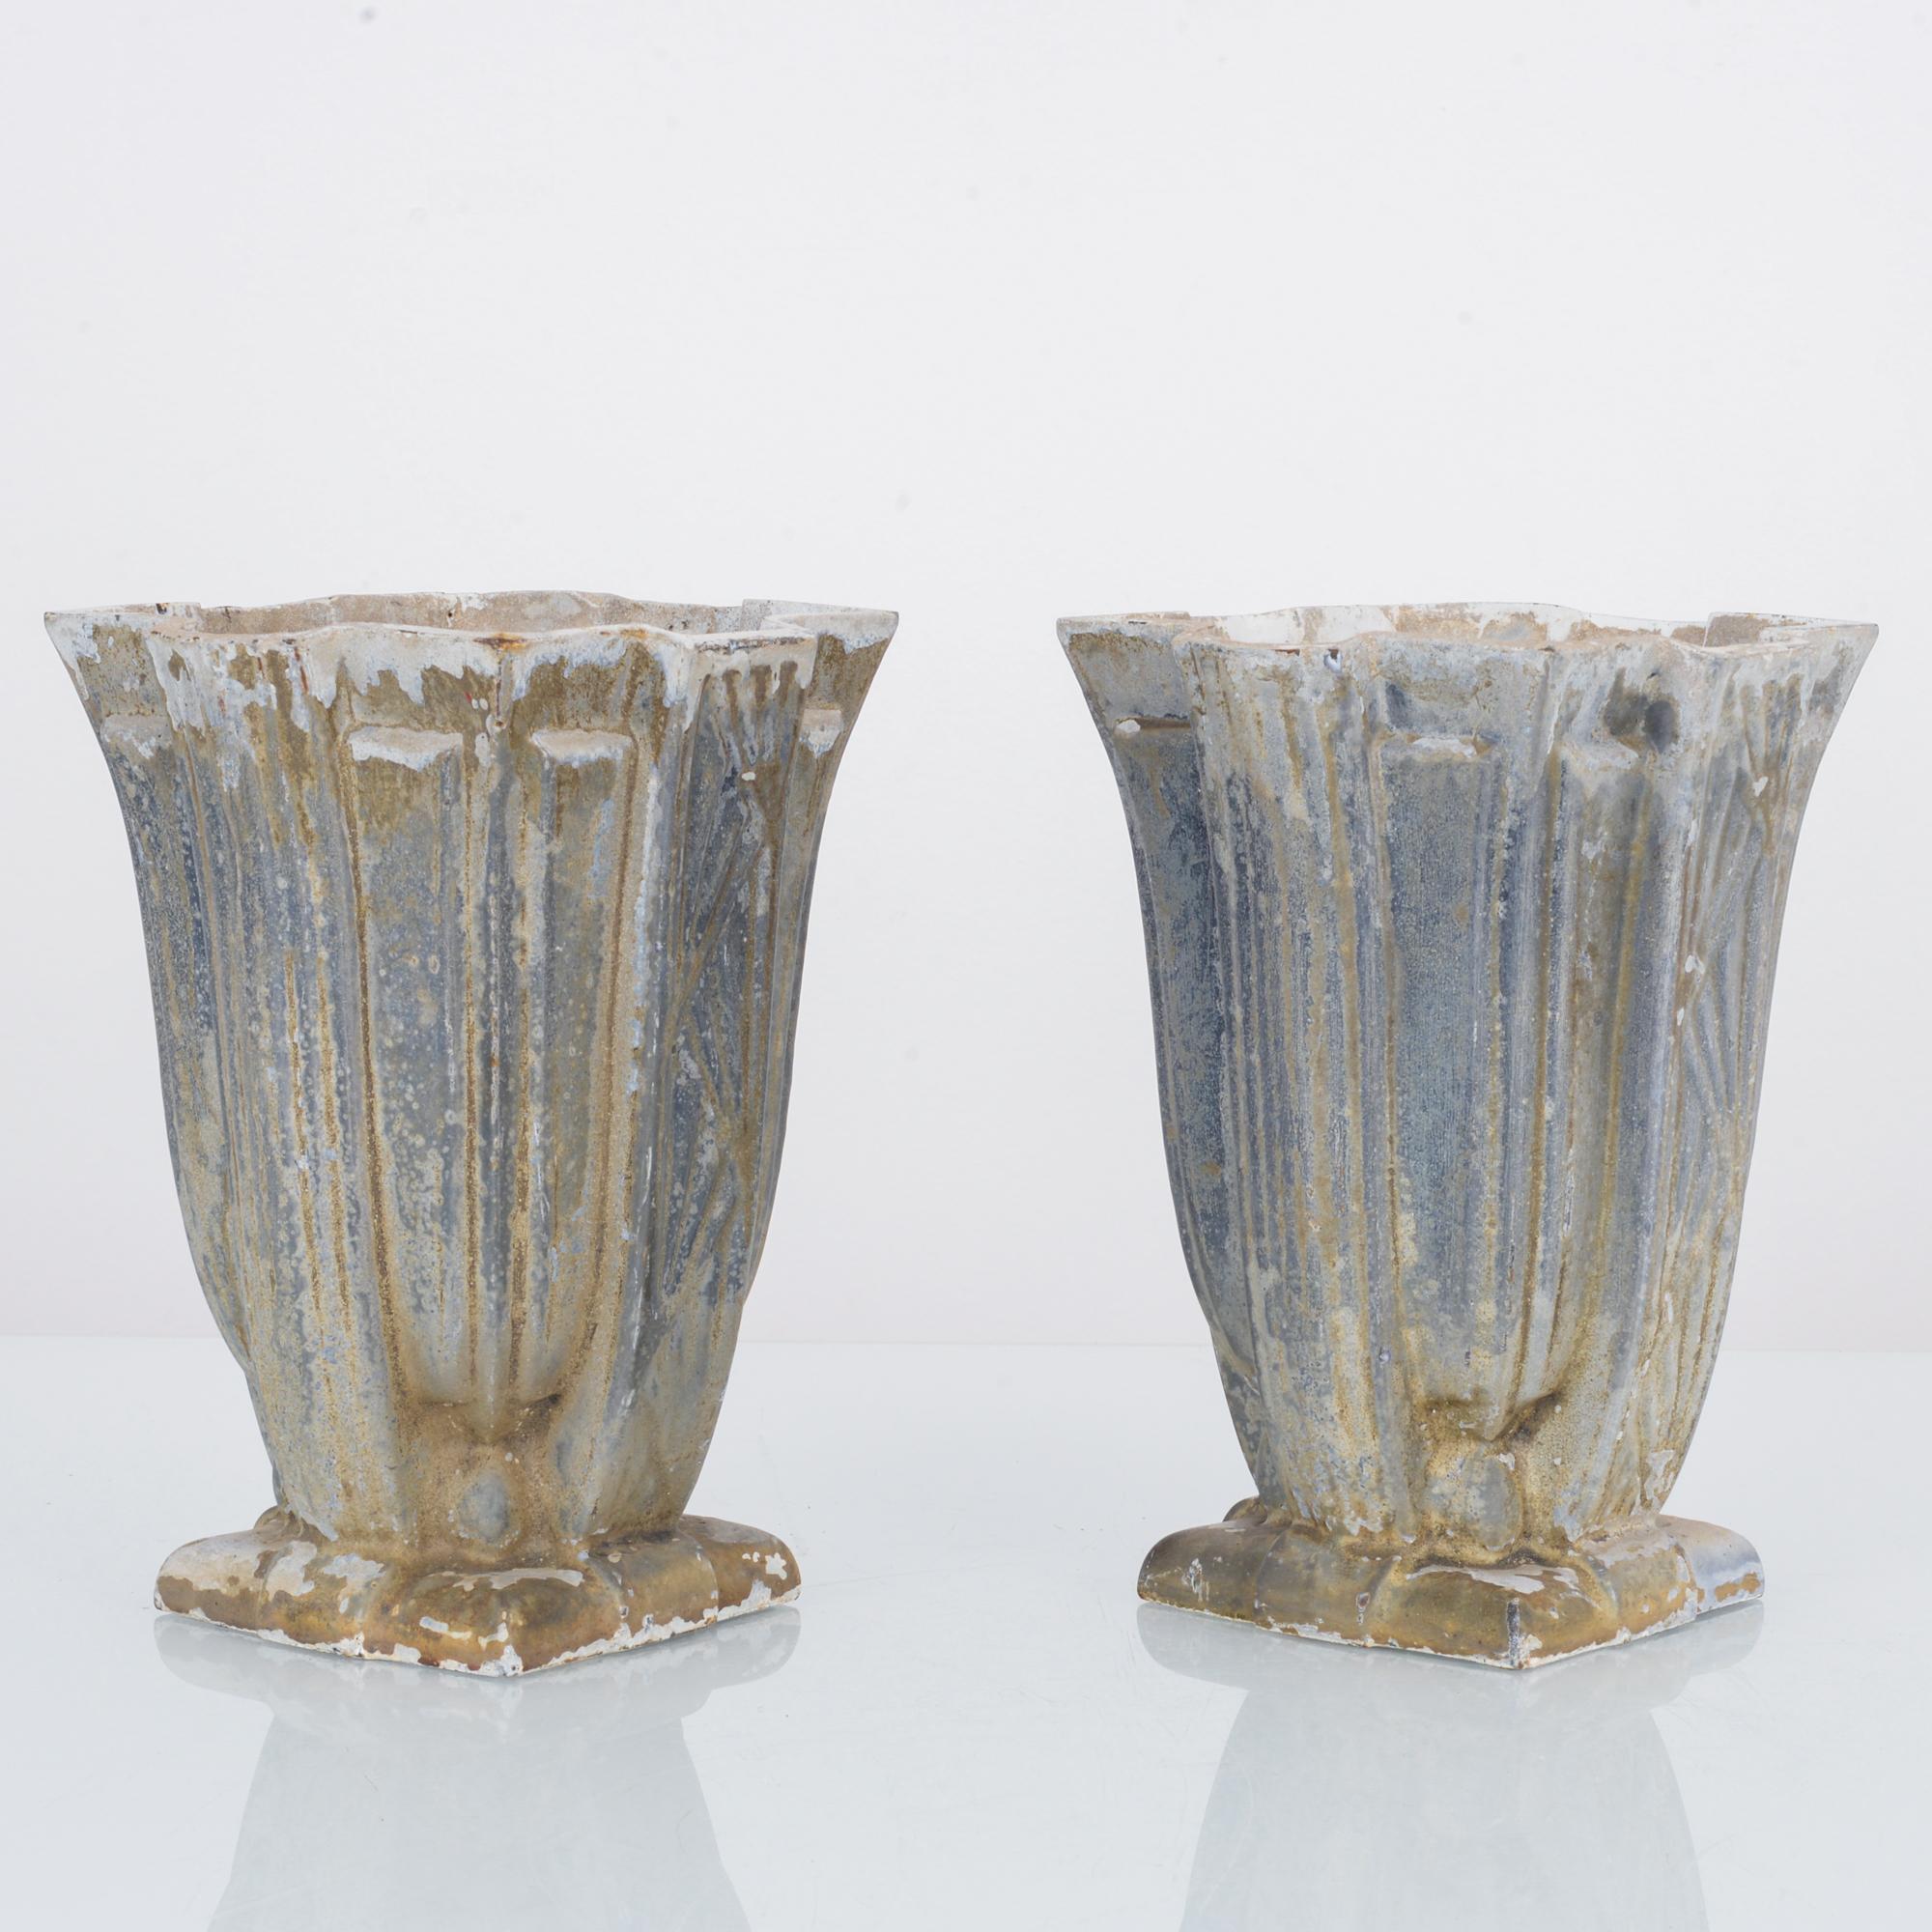 Beaux Arts Early 20th Century French Cast Iron Planters, a Pair